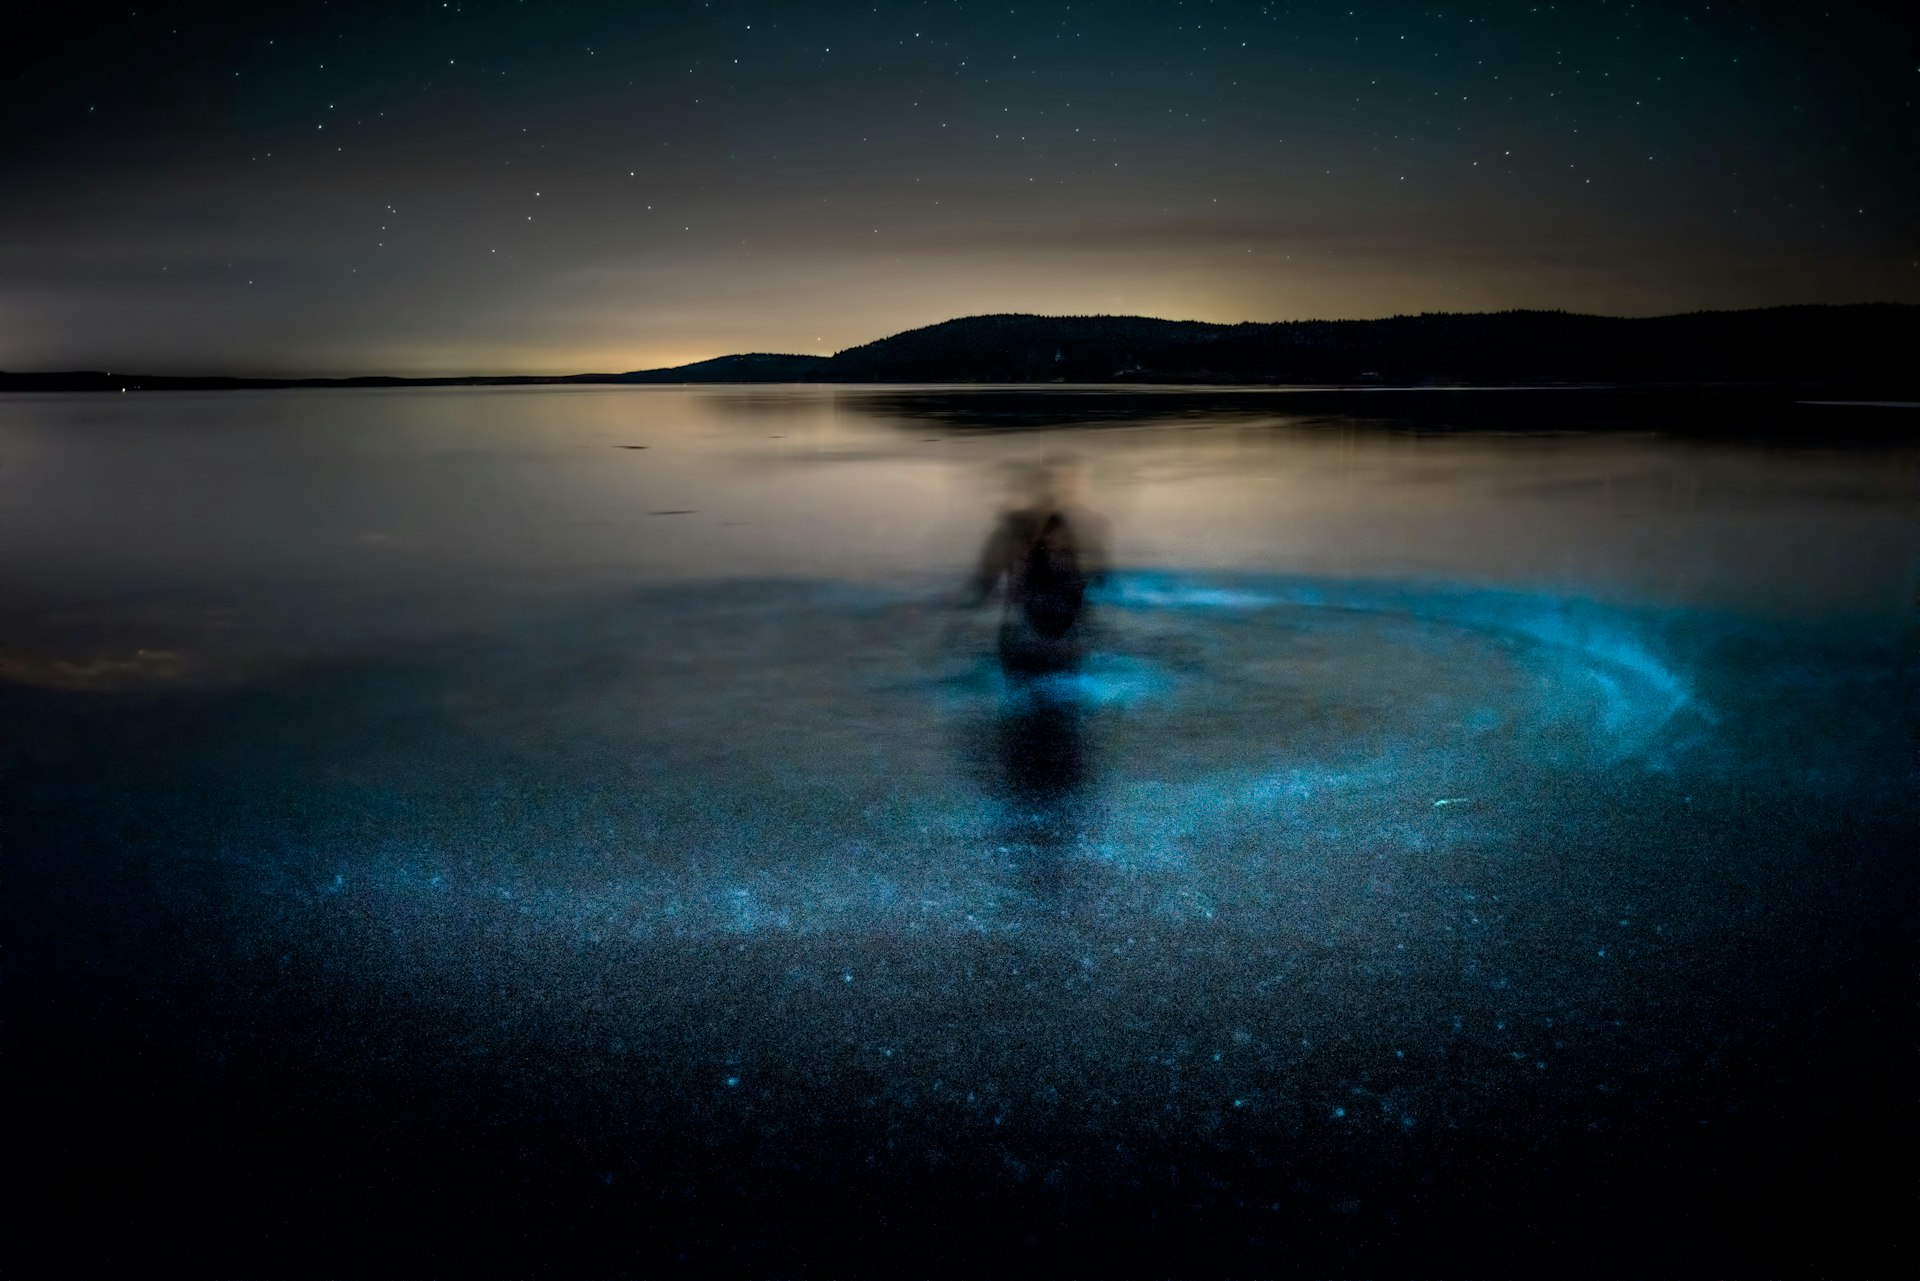 A blurred figure moves in the sea with swirling blue lights in the water around them